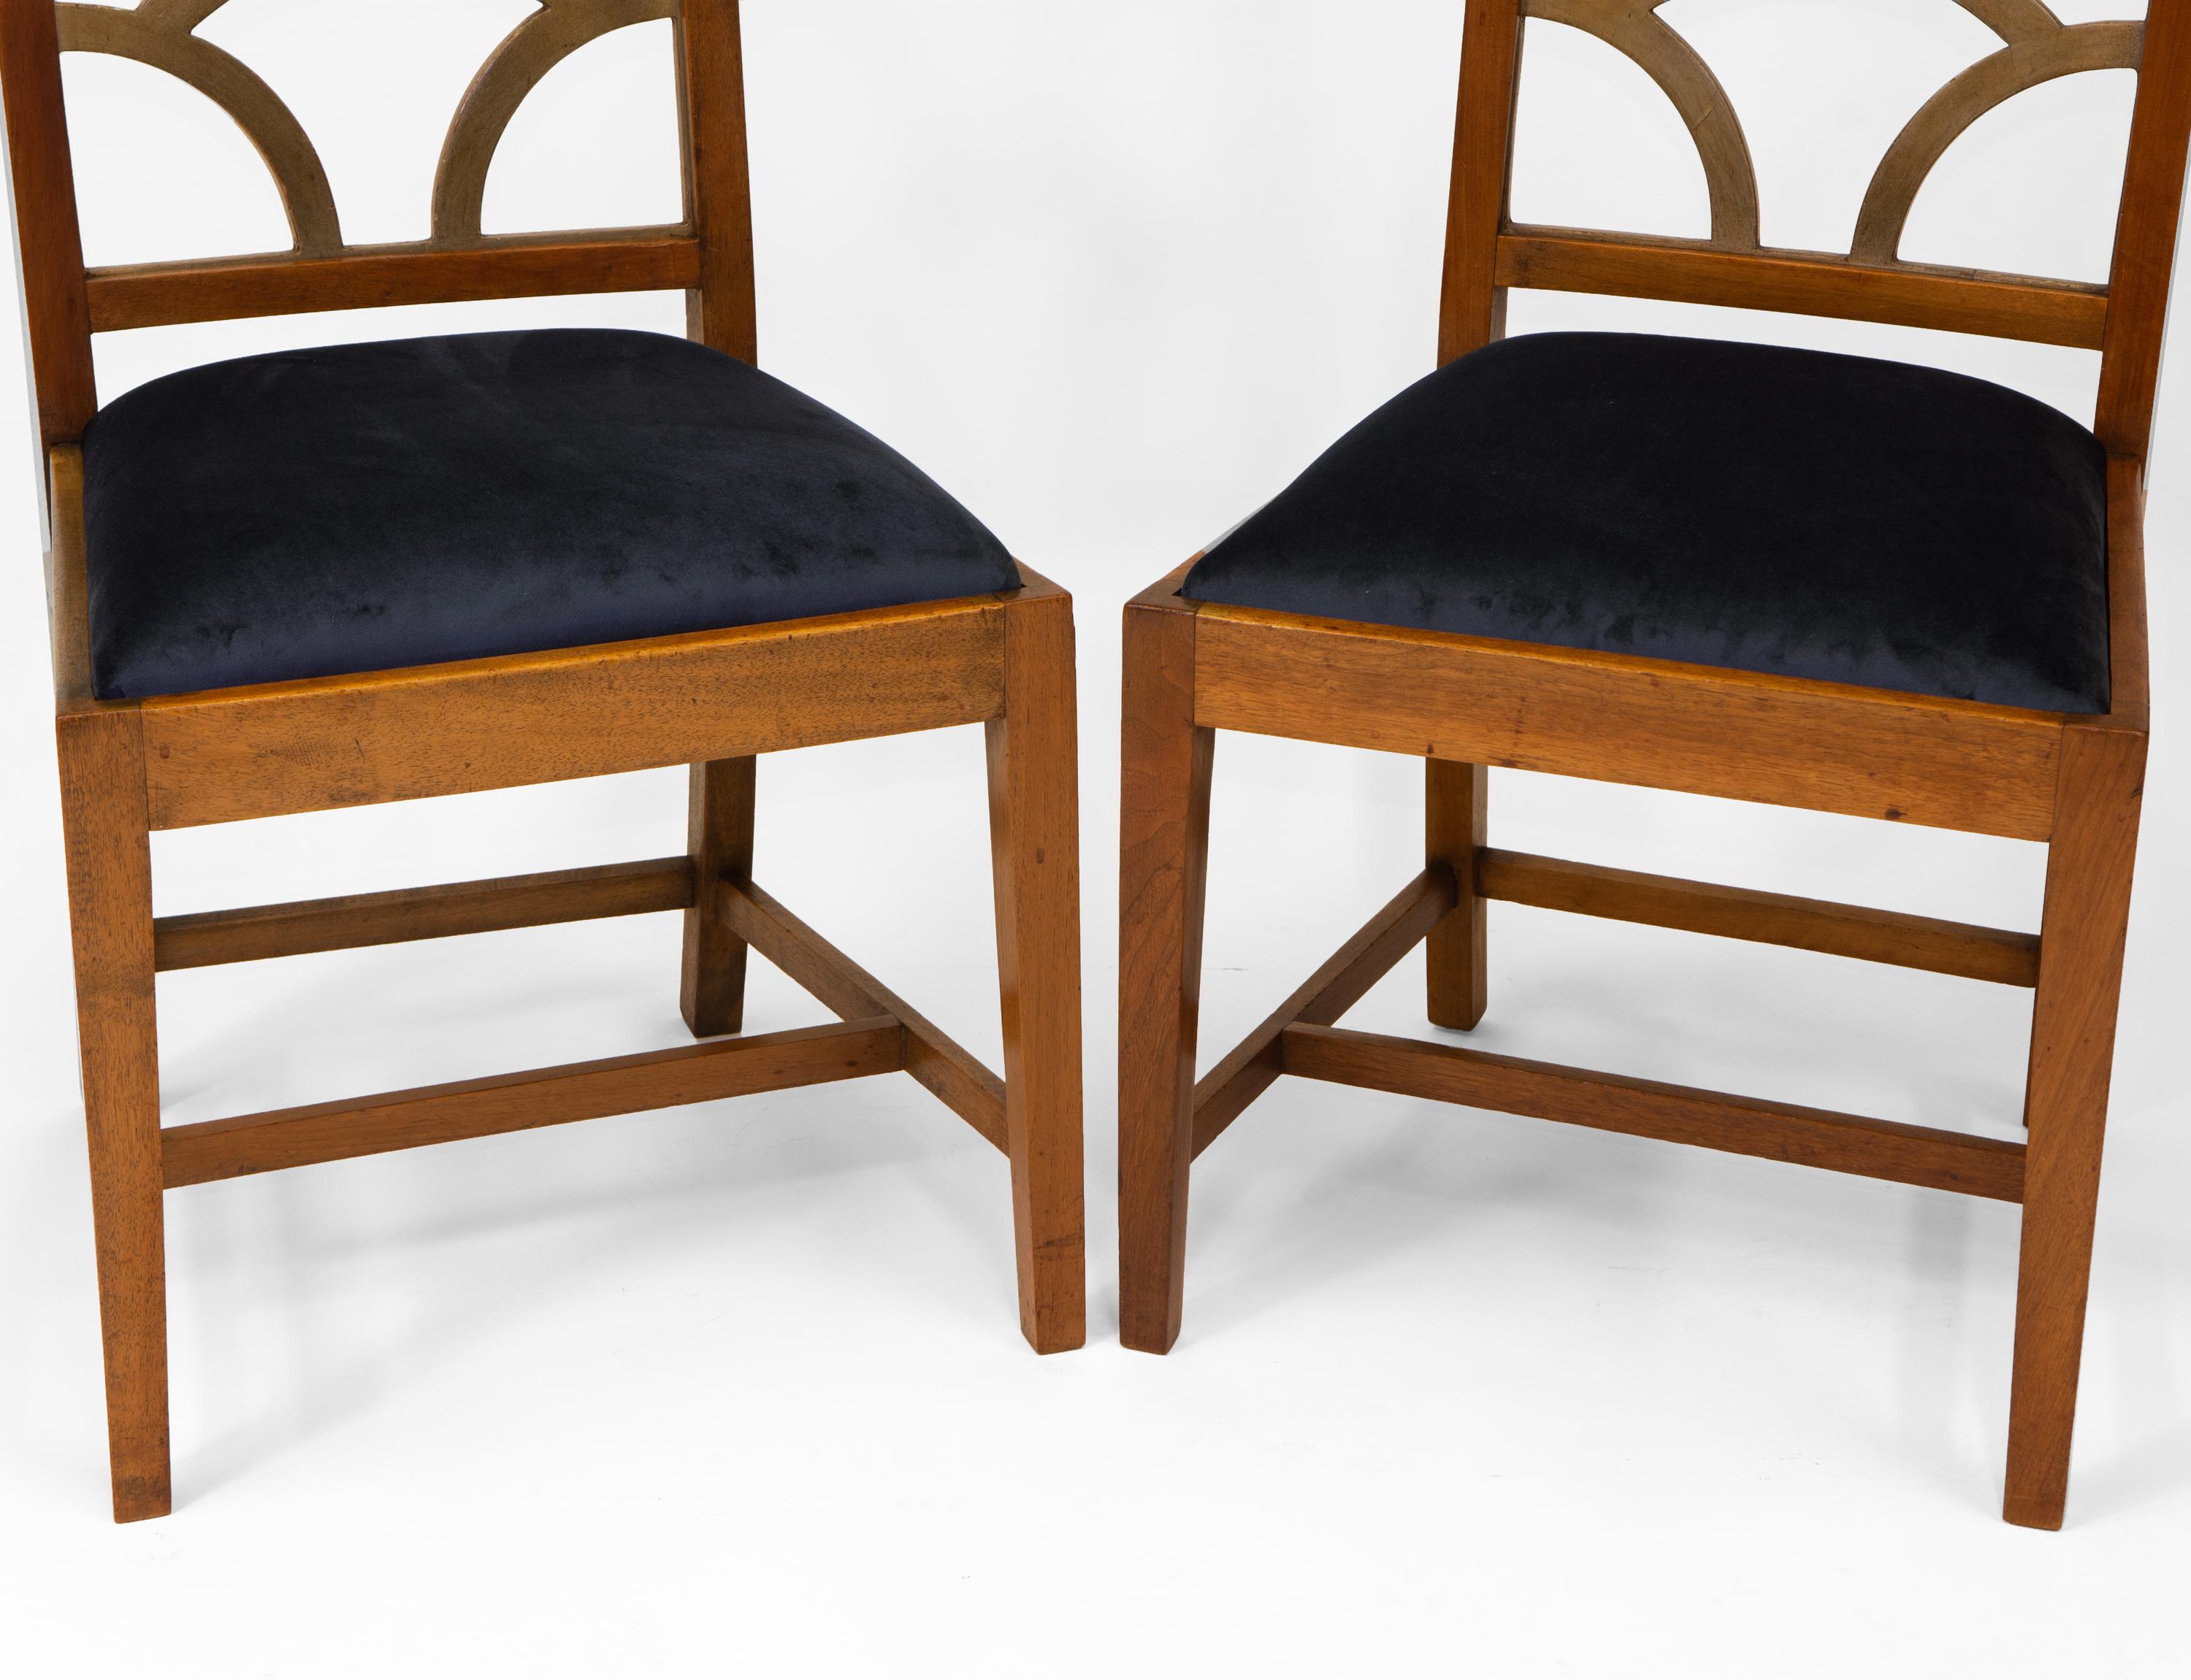 Rowley Gallery Art Deco Pair Of  Walnut Cloud Form Back Side Chairs 1930's 1